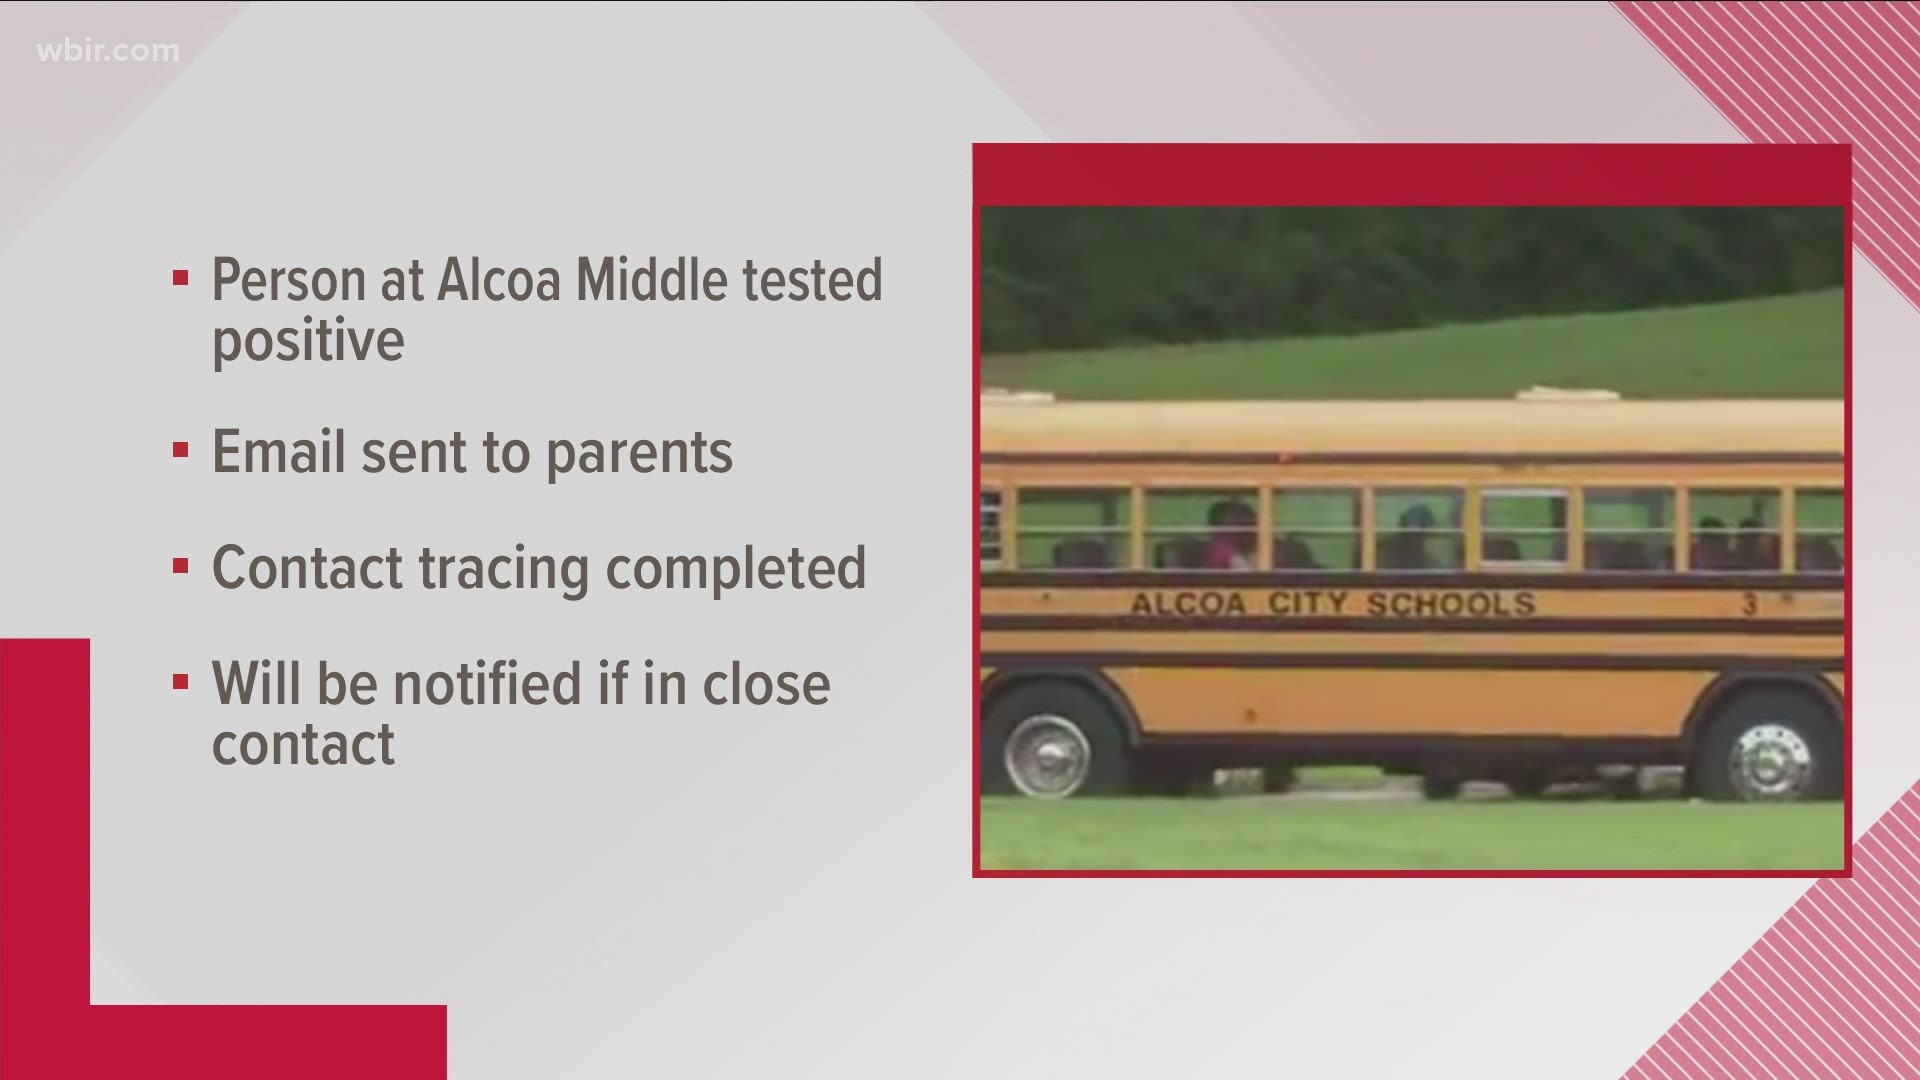 A person in Alcoa Middle School tested positive for COVID-19, according a notice sent to parents.